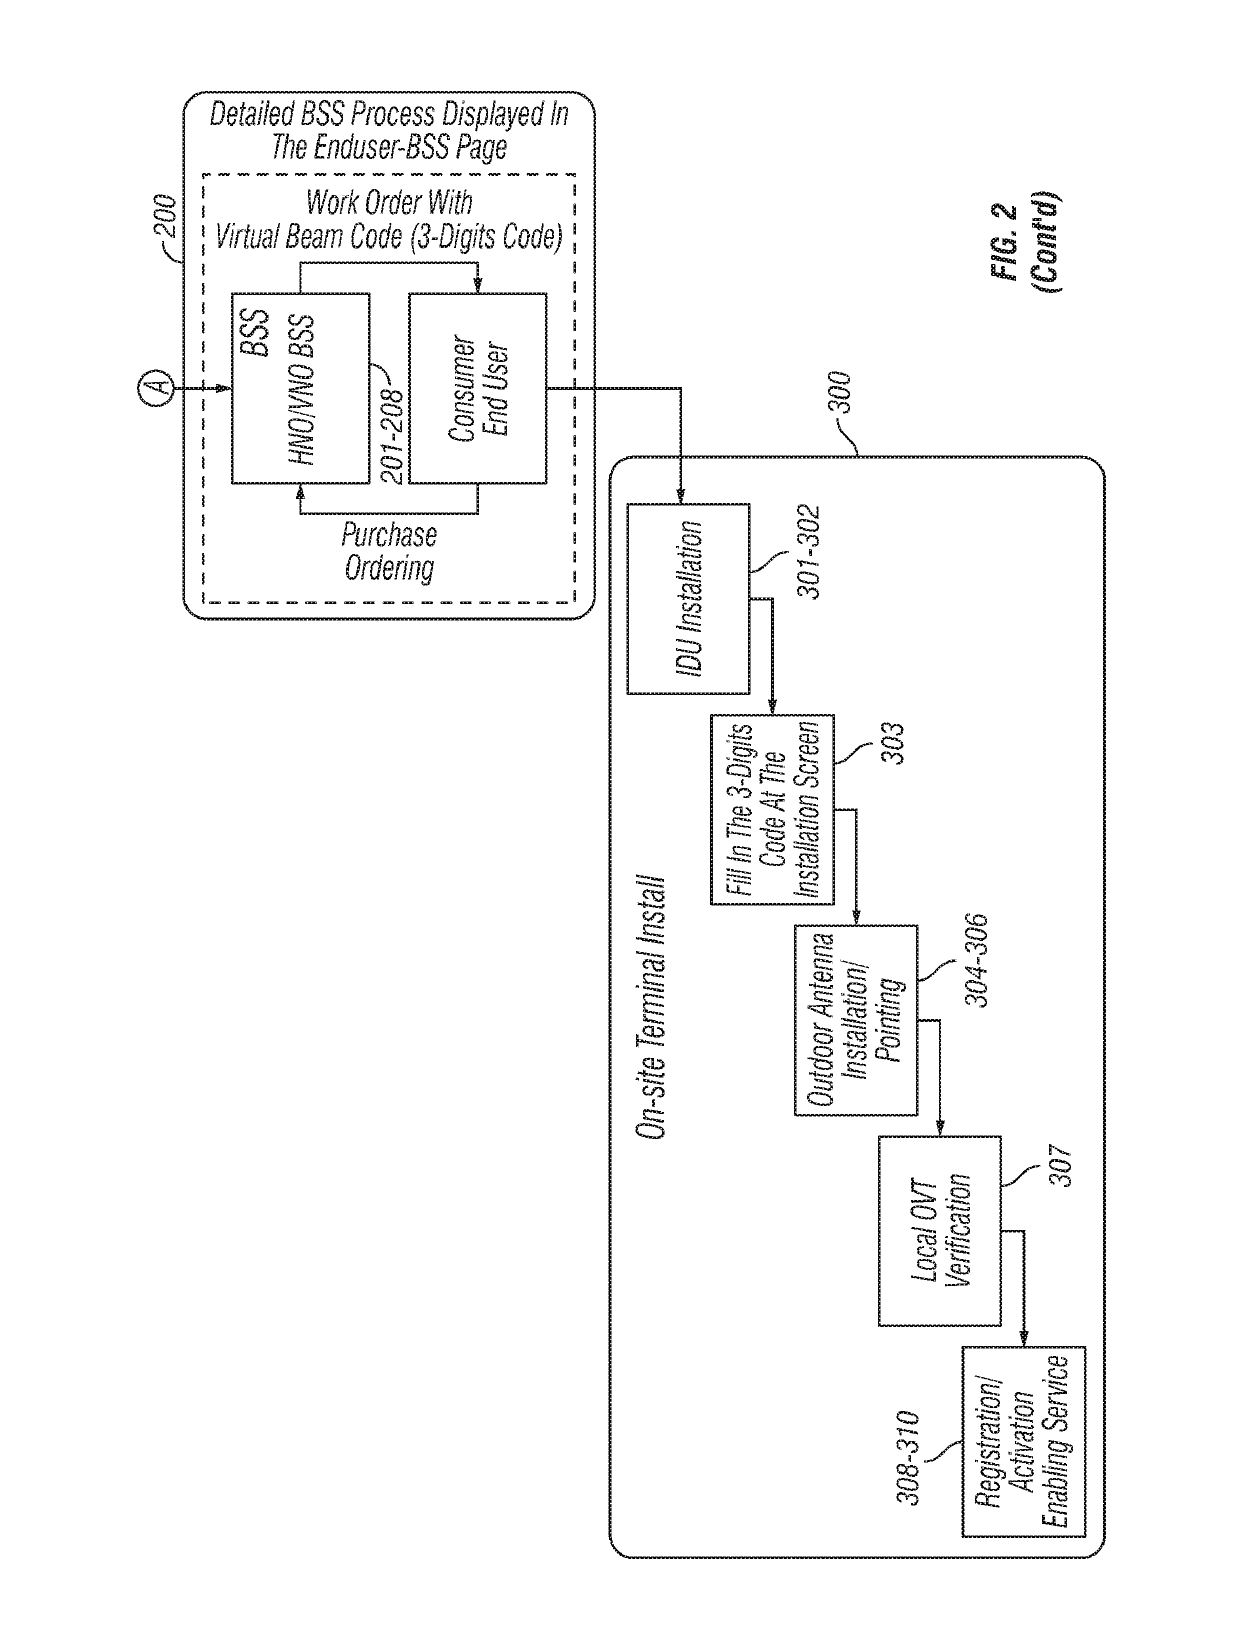 Satellite communication network terminal installation method and system